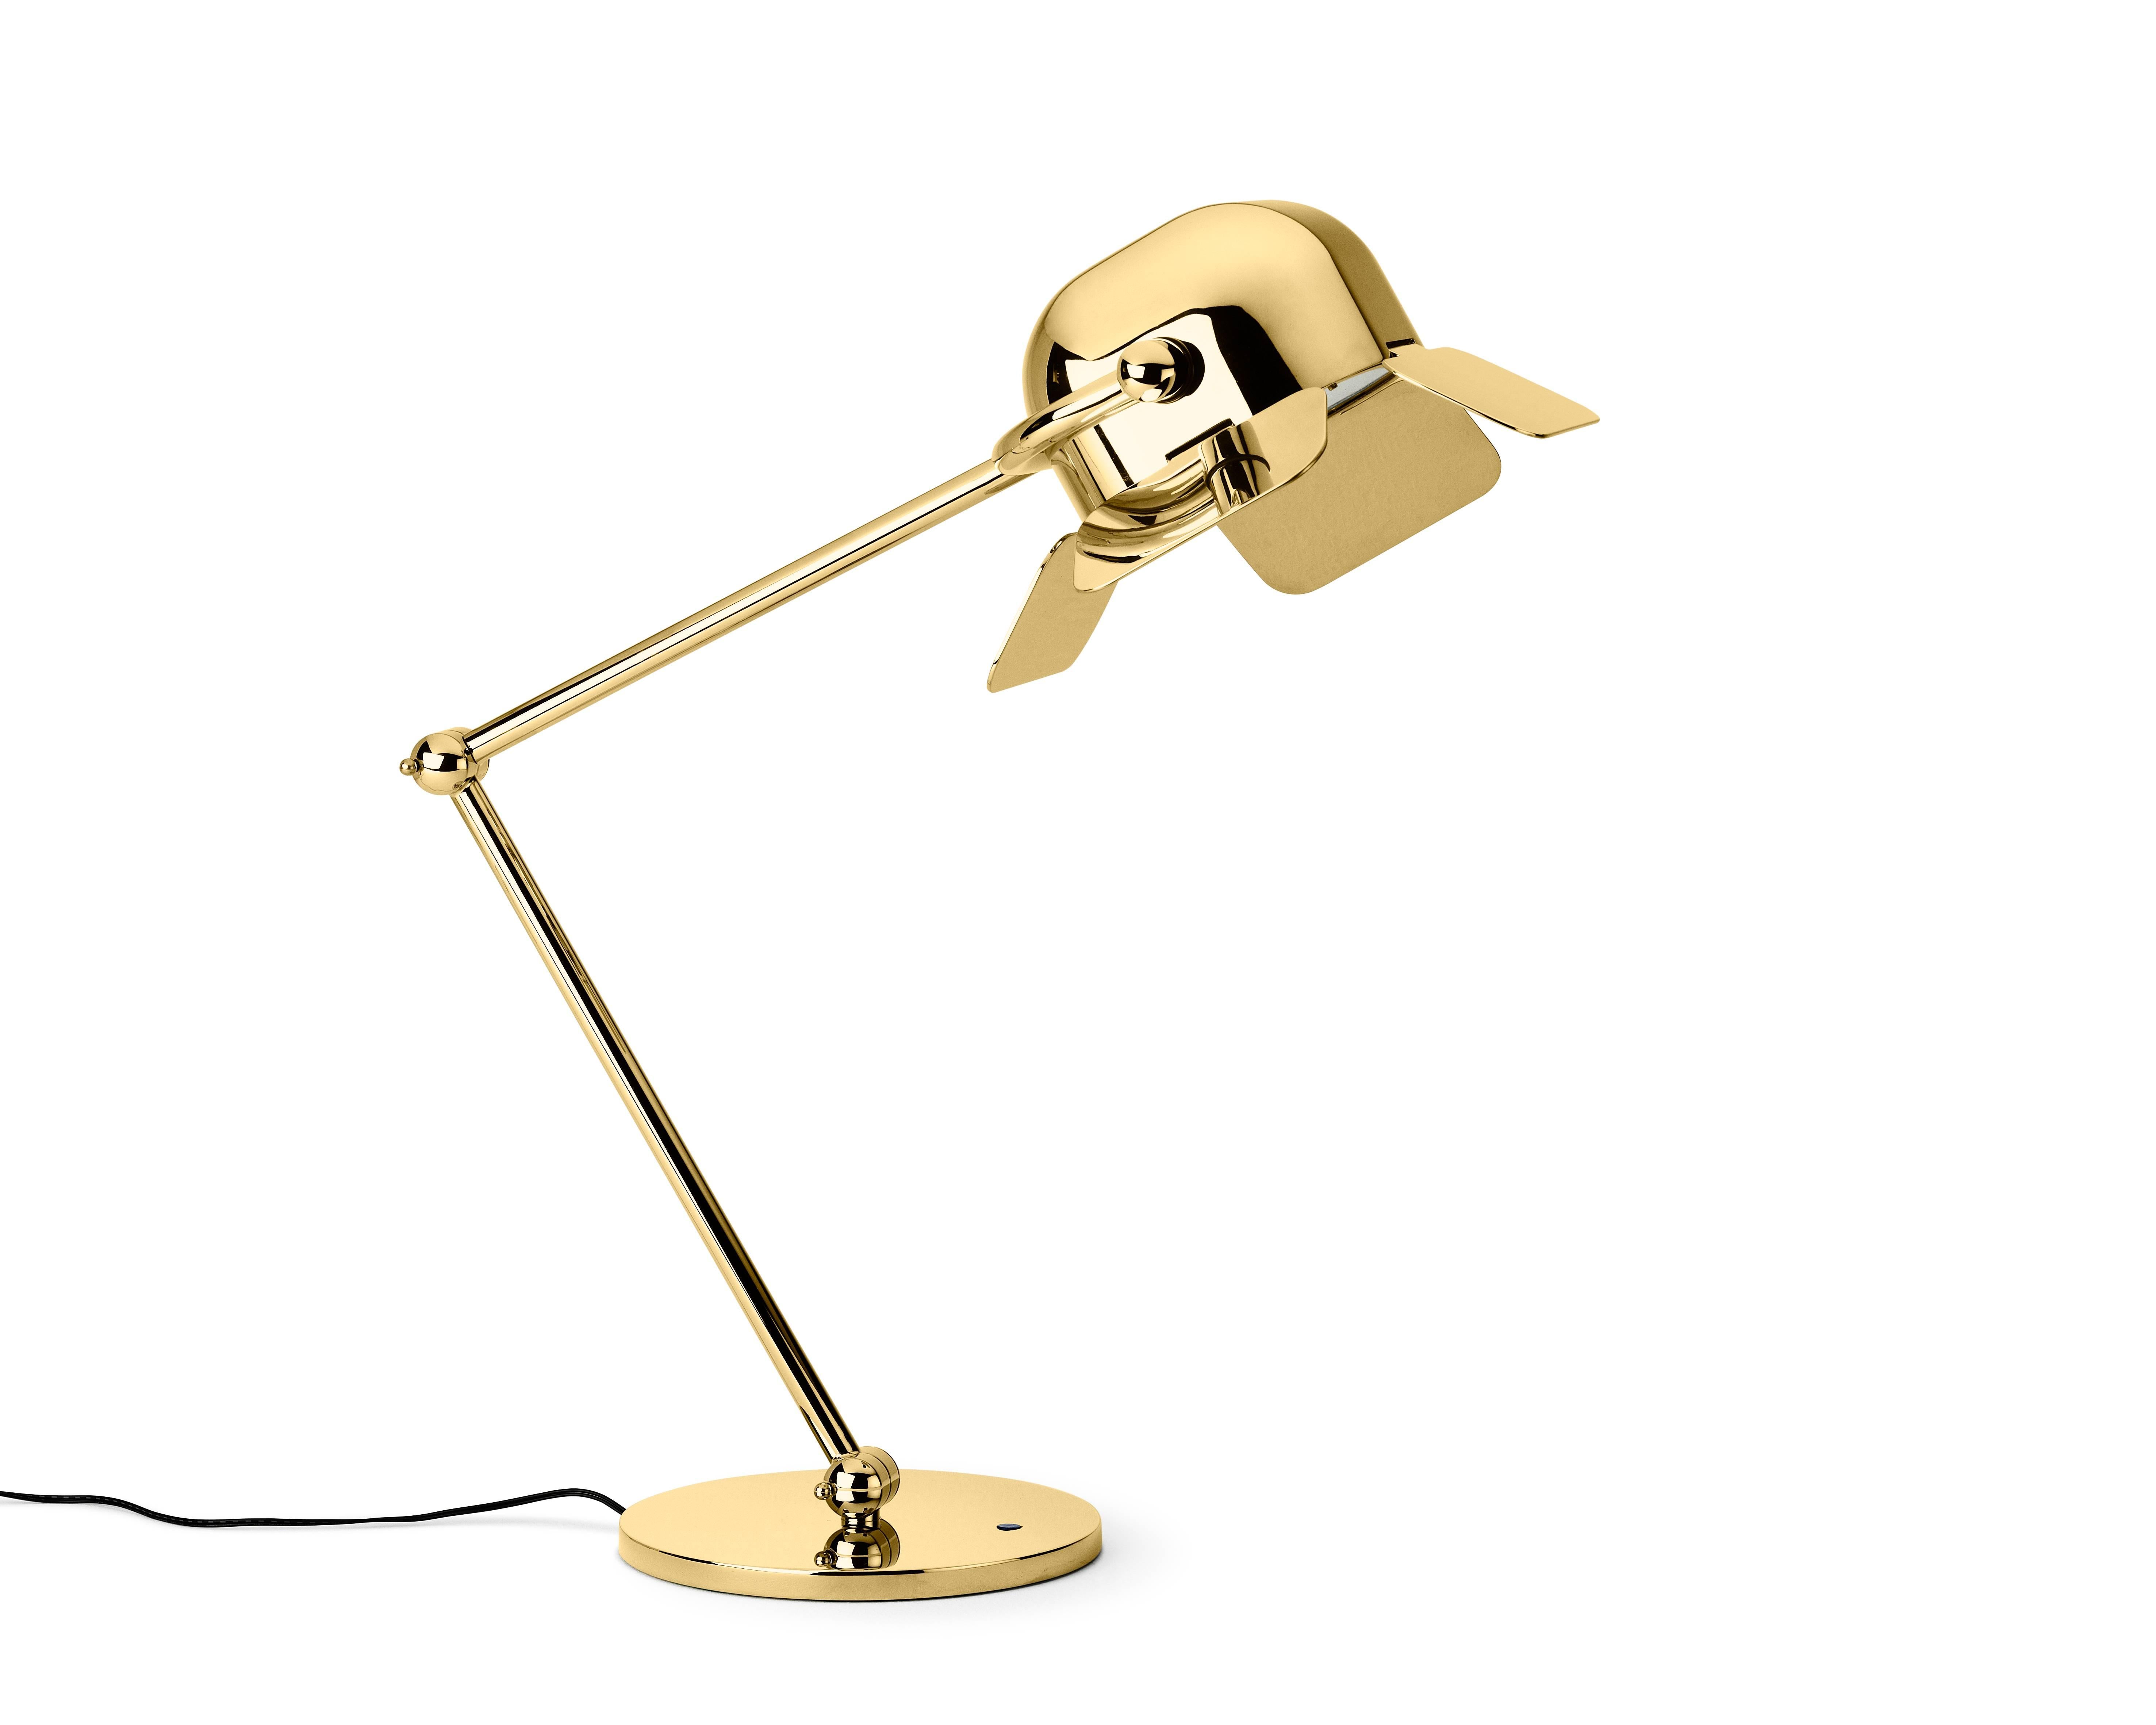 Nika Zupanc designed this elegant lamp where the light is projected through four adjustable flaps and the Minimalist structure in steel is evocative of a flamingo's leg. The golden finish will brighten up even the coldest of corners.